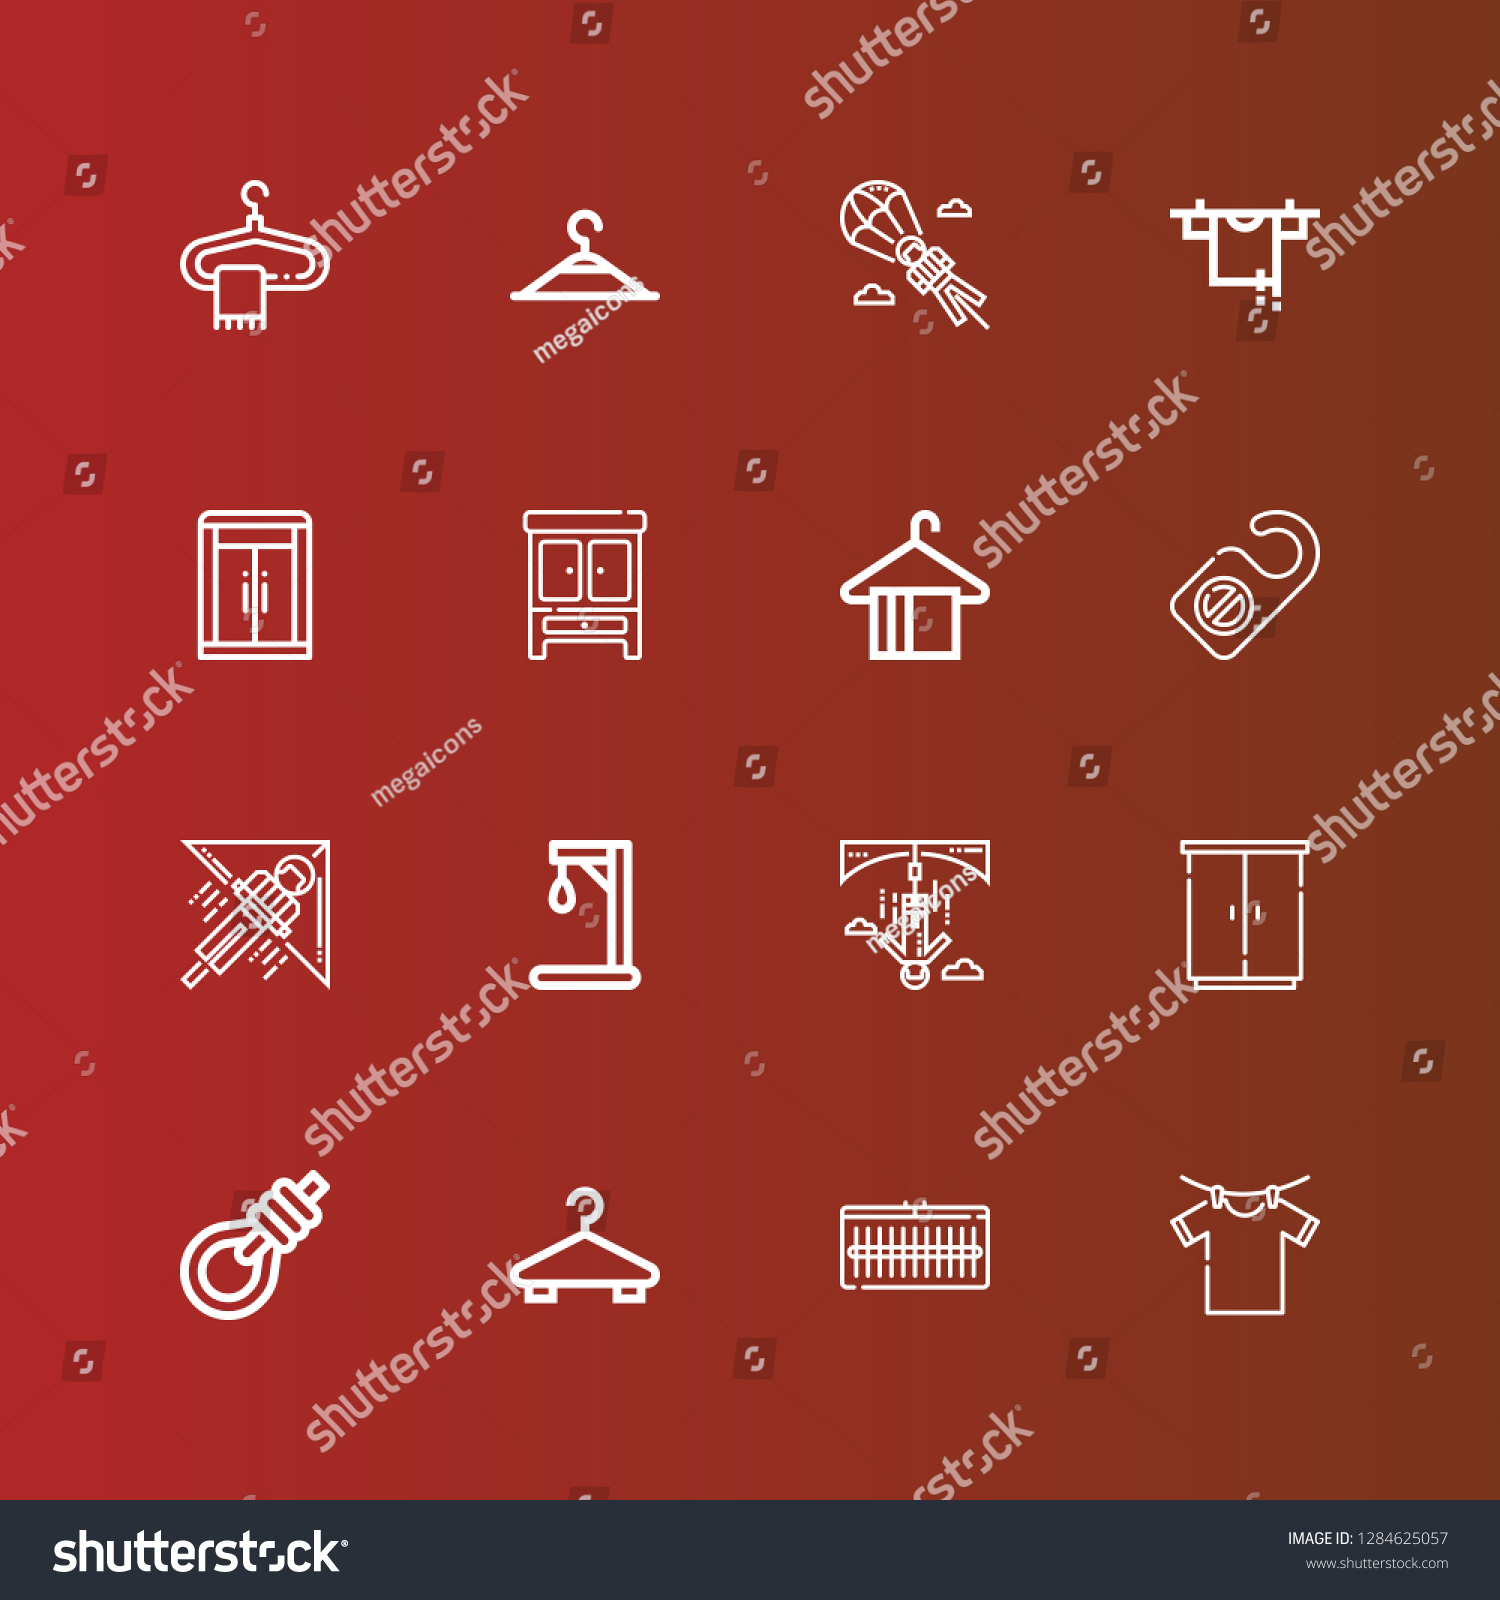 Editable 16 hang icons for web and mobile. Set of hang included icons line Clothes hanger, Wardrobe, Hanger, Gallows, Bungee jumping, Gallow, Hang gliding, Door hanger on red #1284625057